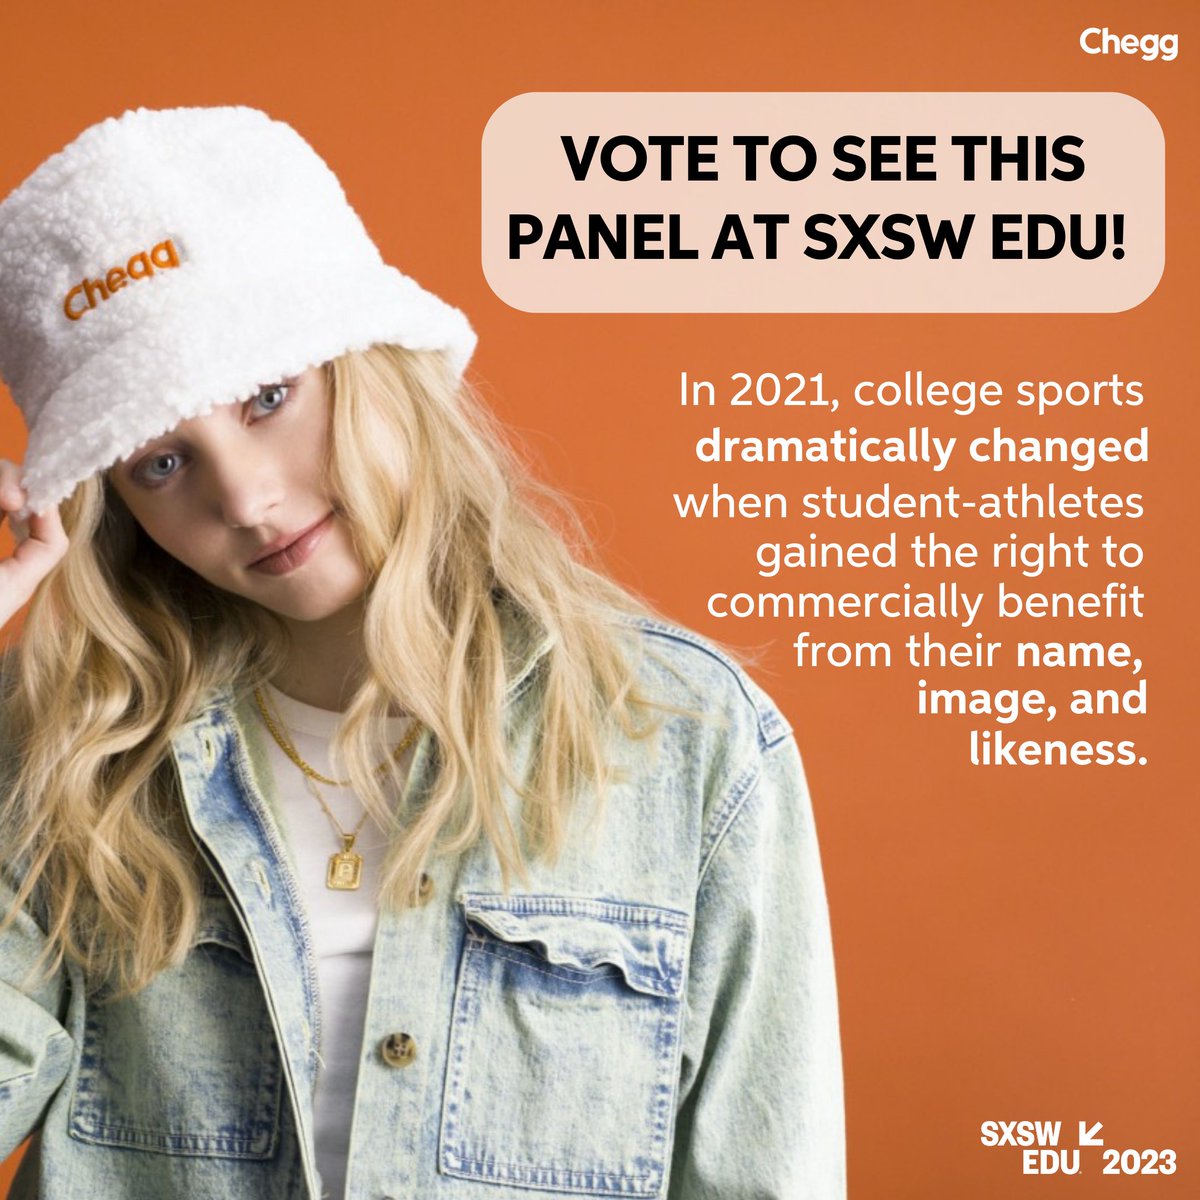 We're excited to have a conversation at next year's #SXSWEdu about how NIL rights have impacted student athletes. But we need your help! Please take a minute to vote for our panel here: panelpicker.sxsw.com/vote/123919